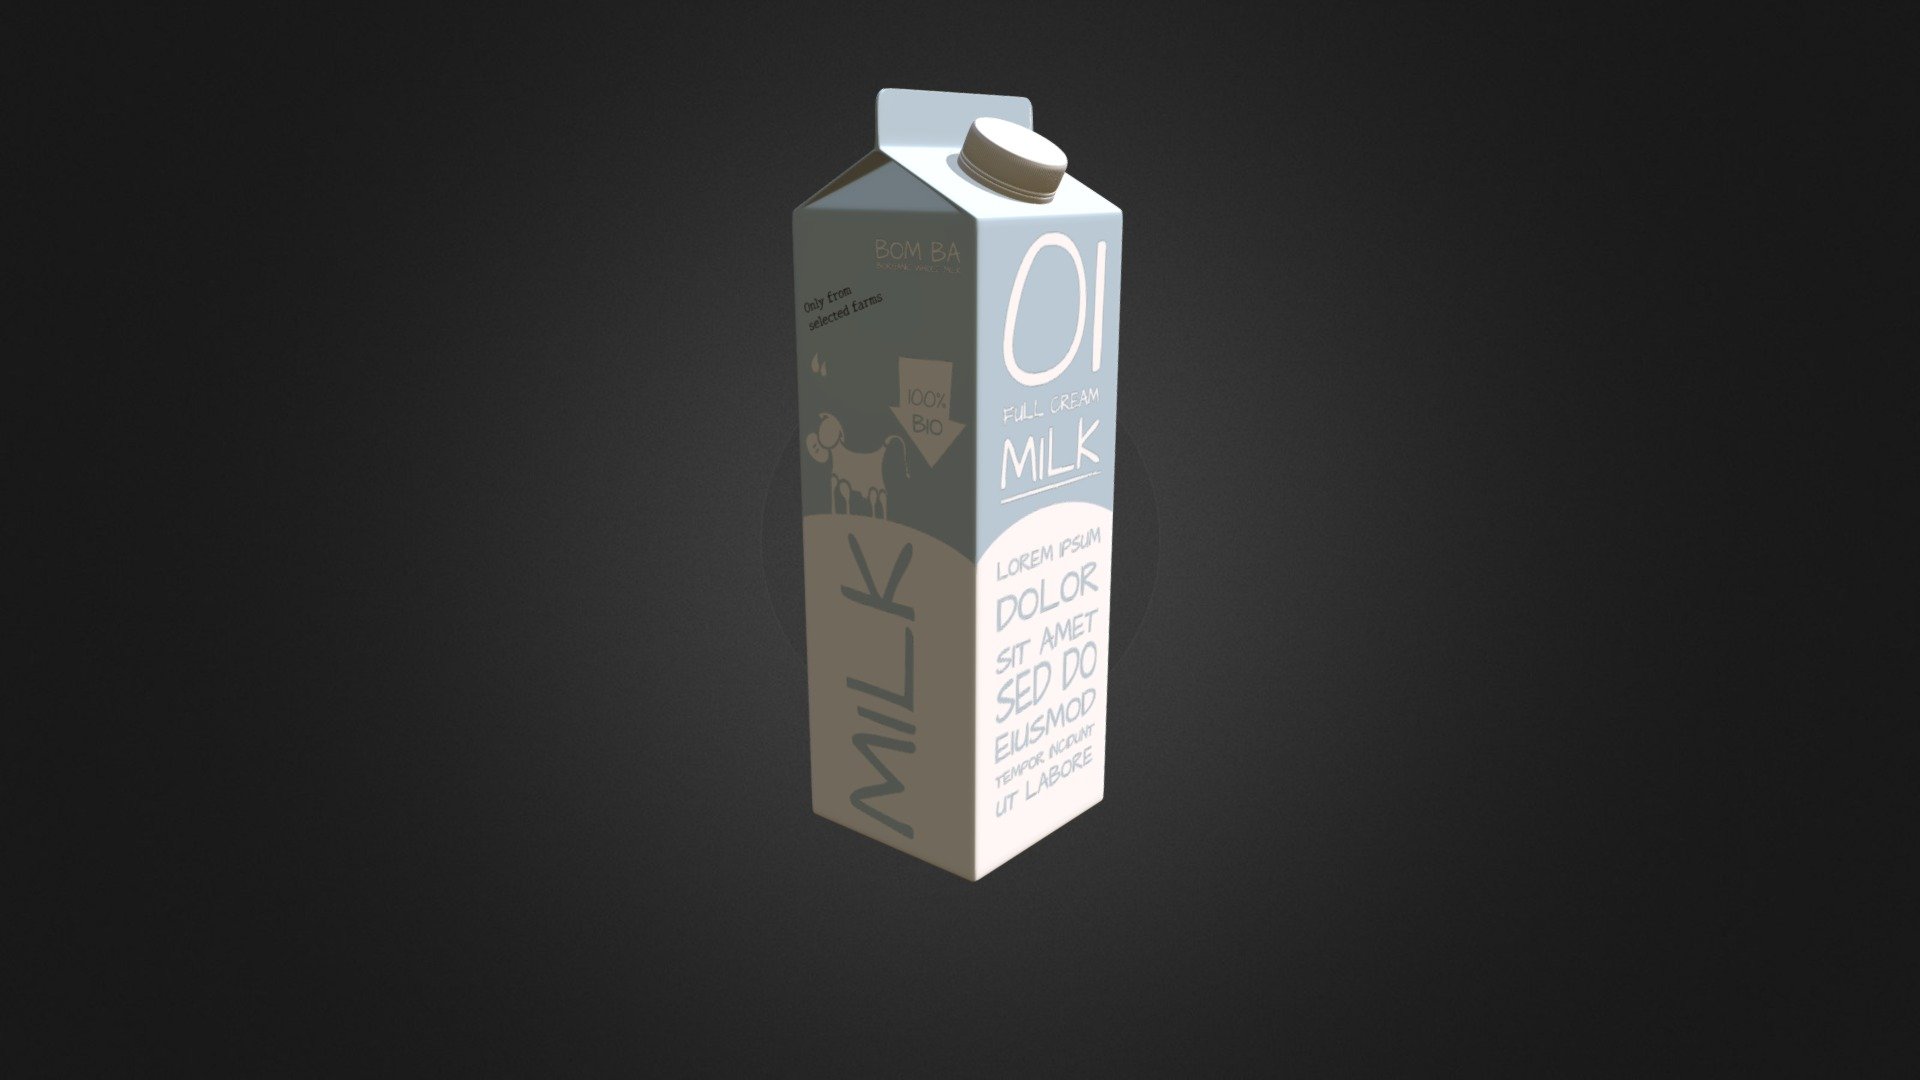 A little study about a milk packaging design. 
I've used for the first time only Adobe Medium and Adobe Illustrator 3d model